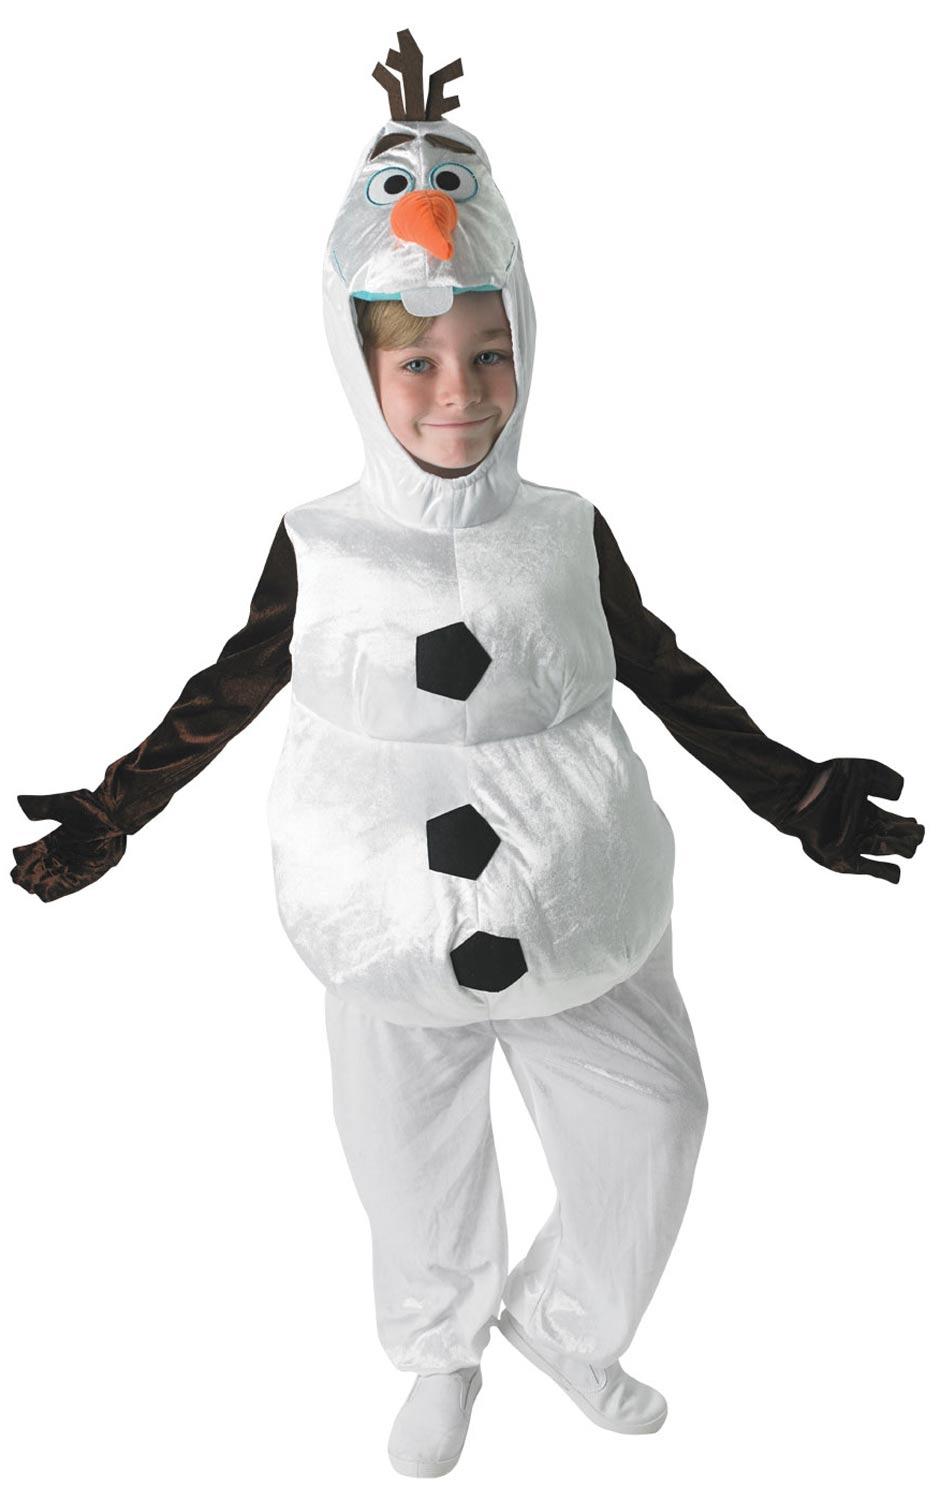 Disney's Olaf Fancy Dress Costume for Children by Rubies 610367 available here at Karnival Costumes online party shop